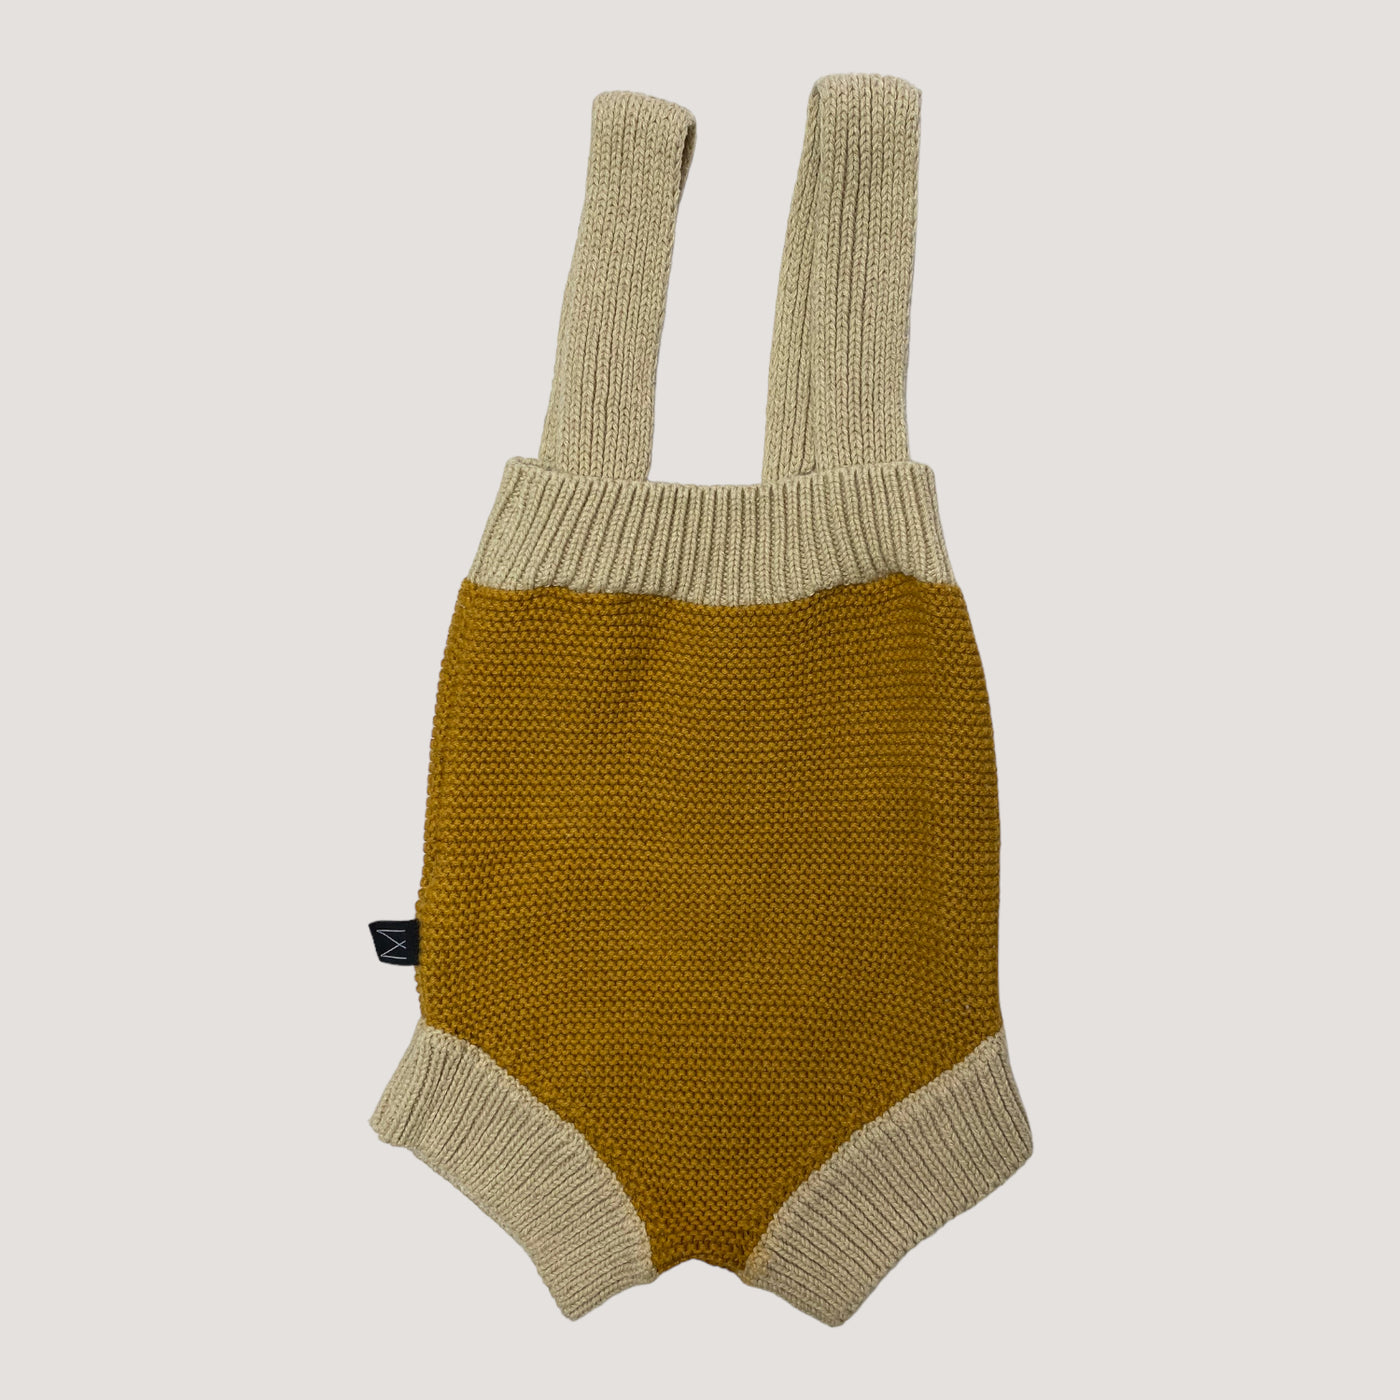 Monkind knitted bloomer shorts, caramel / wheat | 62/68cm